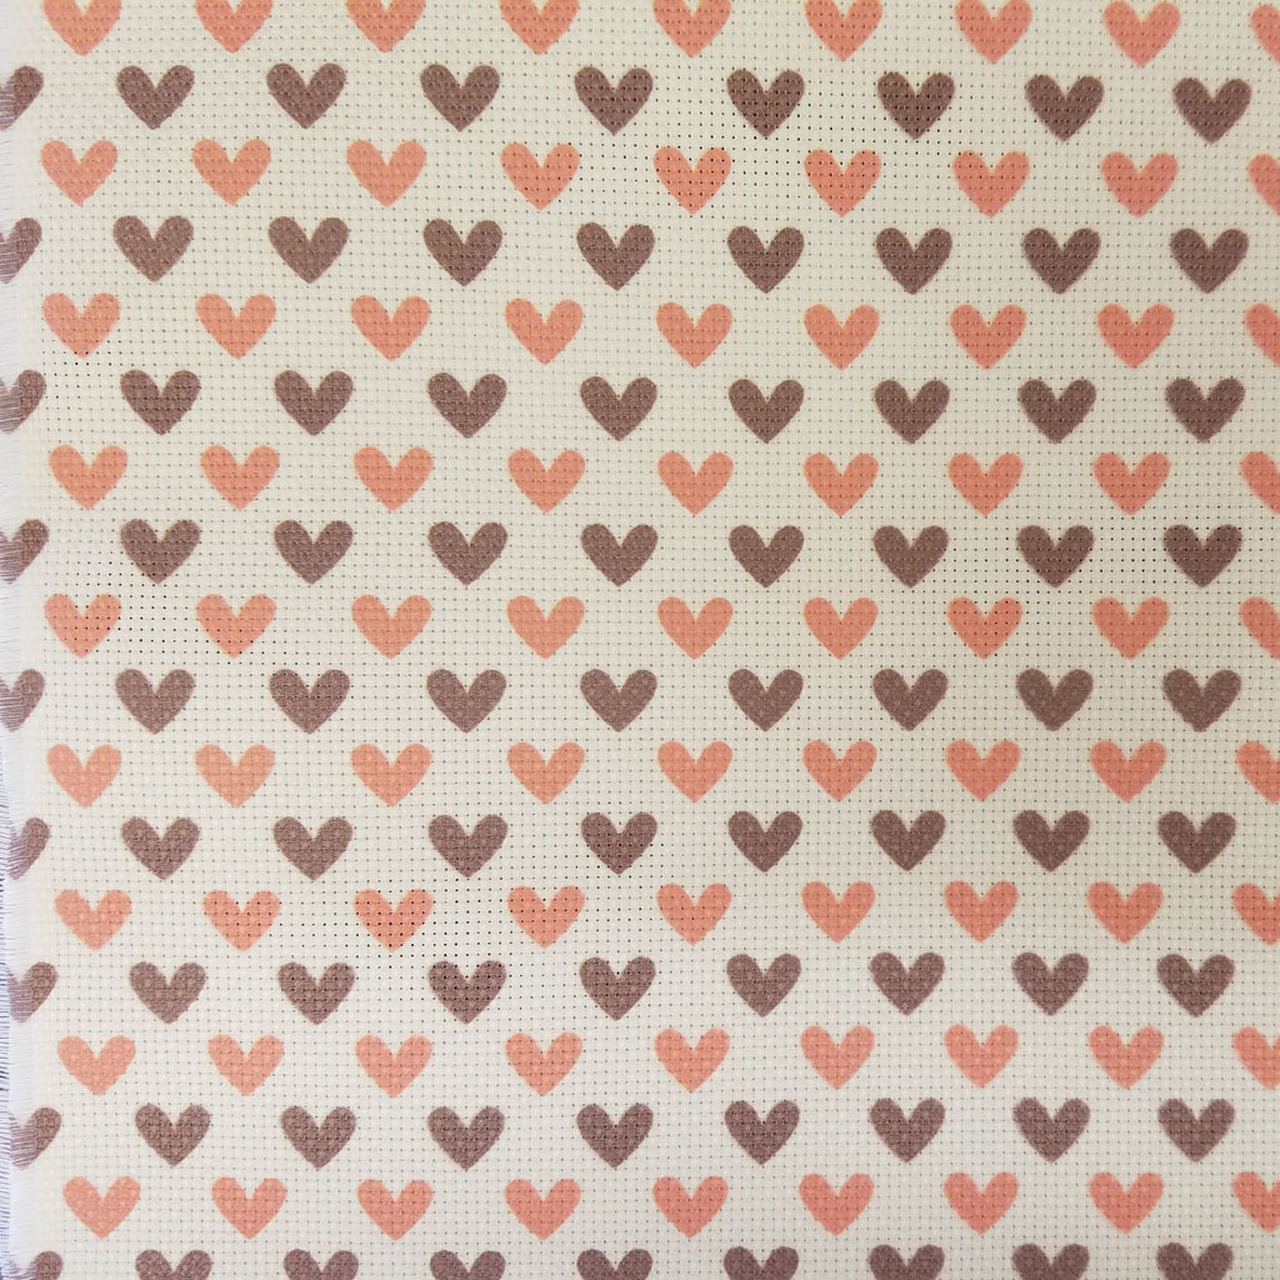 Red And Brown Hearts Patterned Cross Stitch Fabric